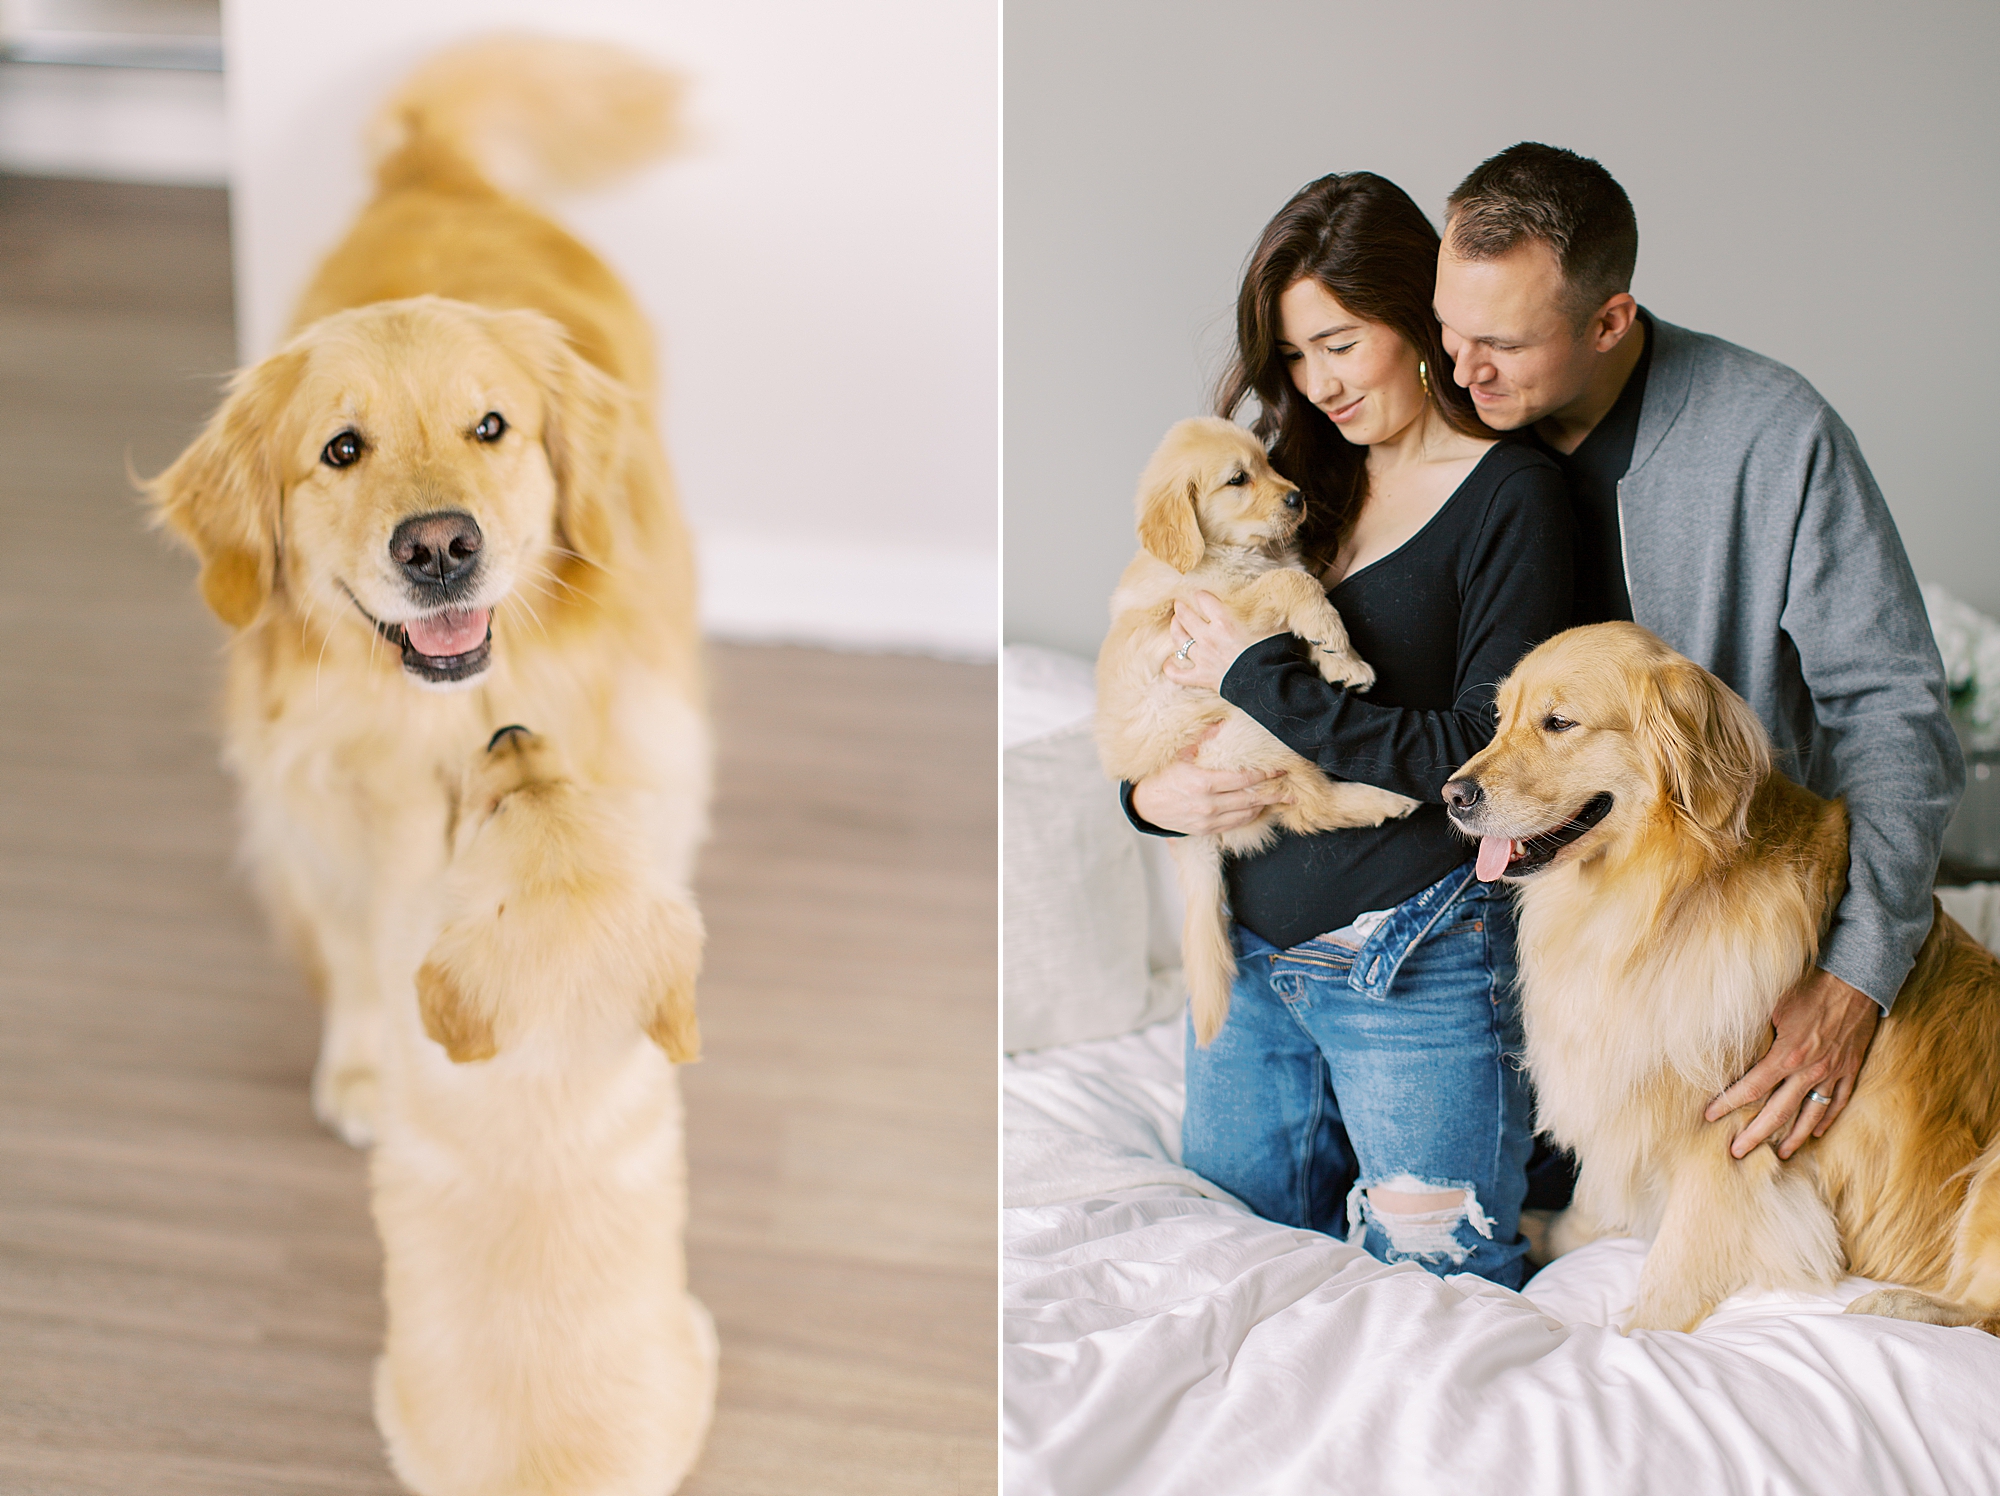 parents play with new puppy during family photos at home